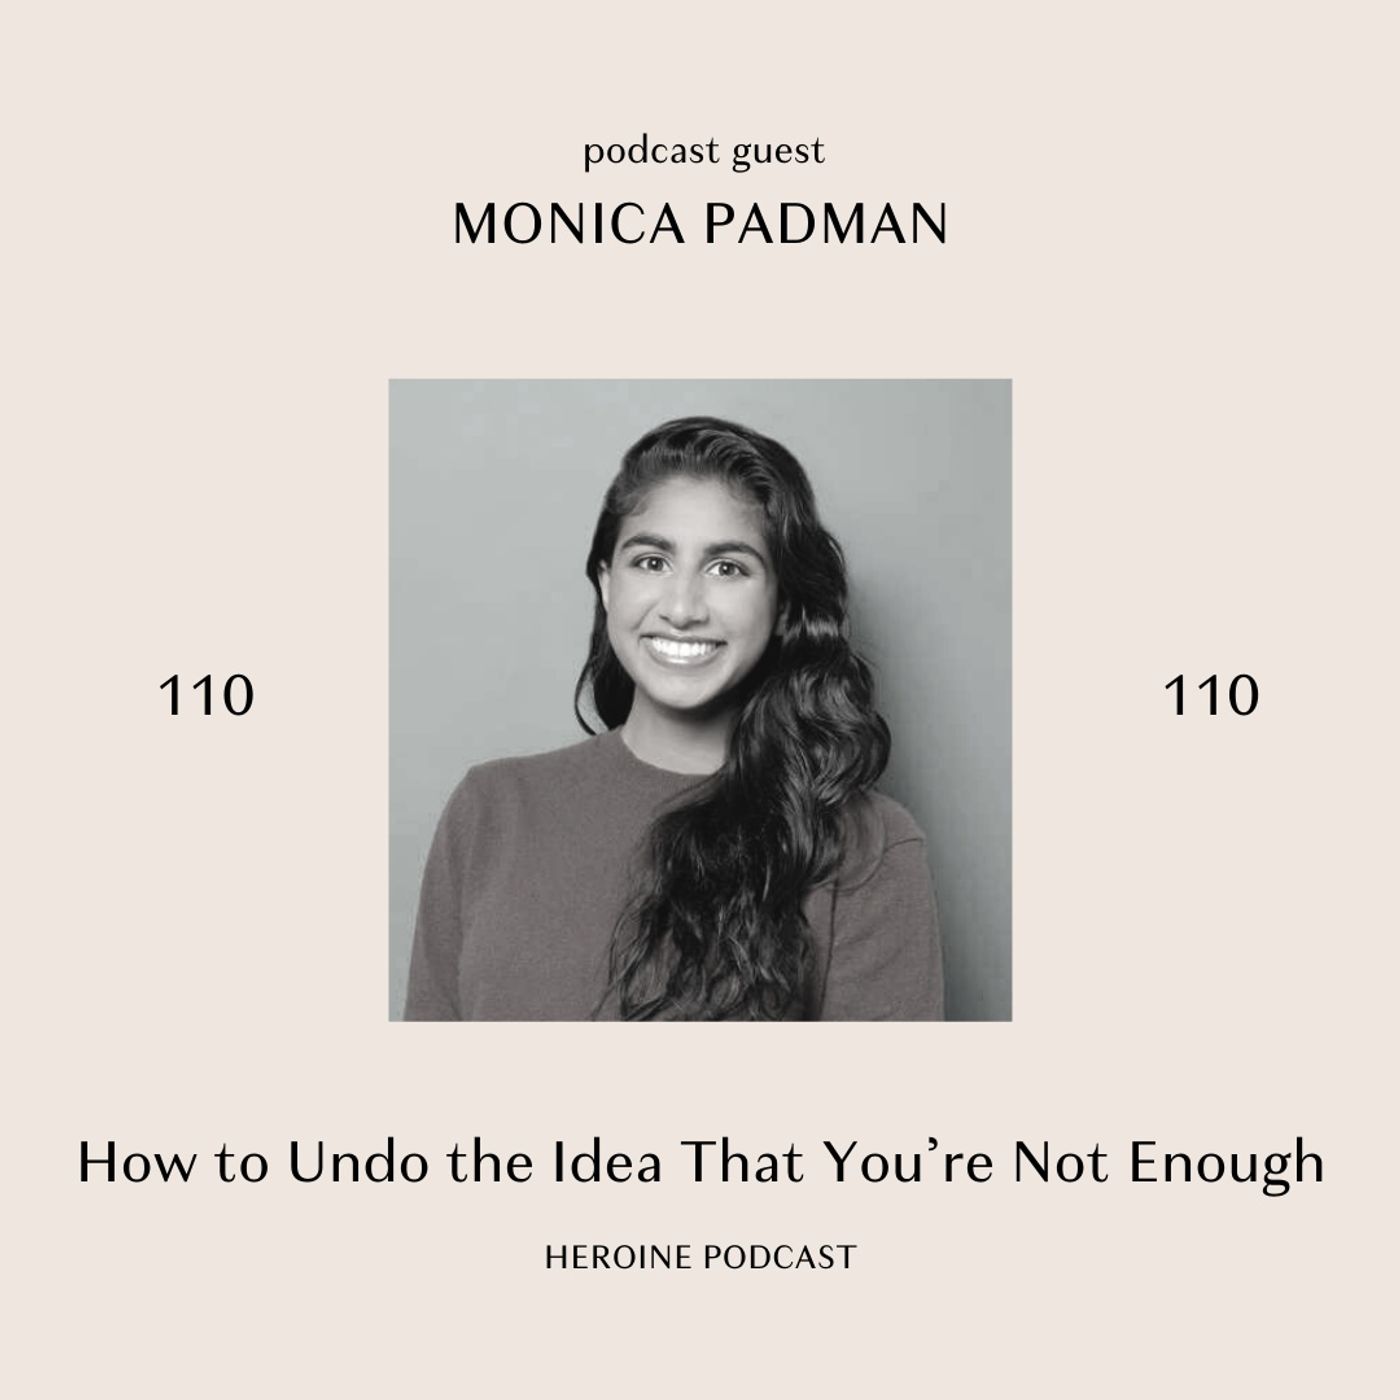 How to Undo the Idea That You’re Not Enough — Monica Padman